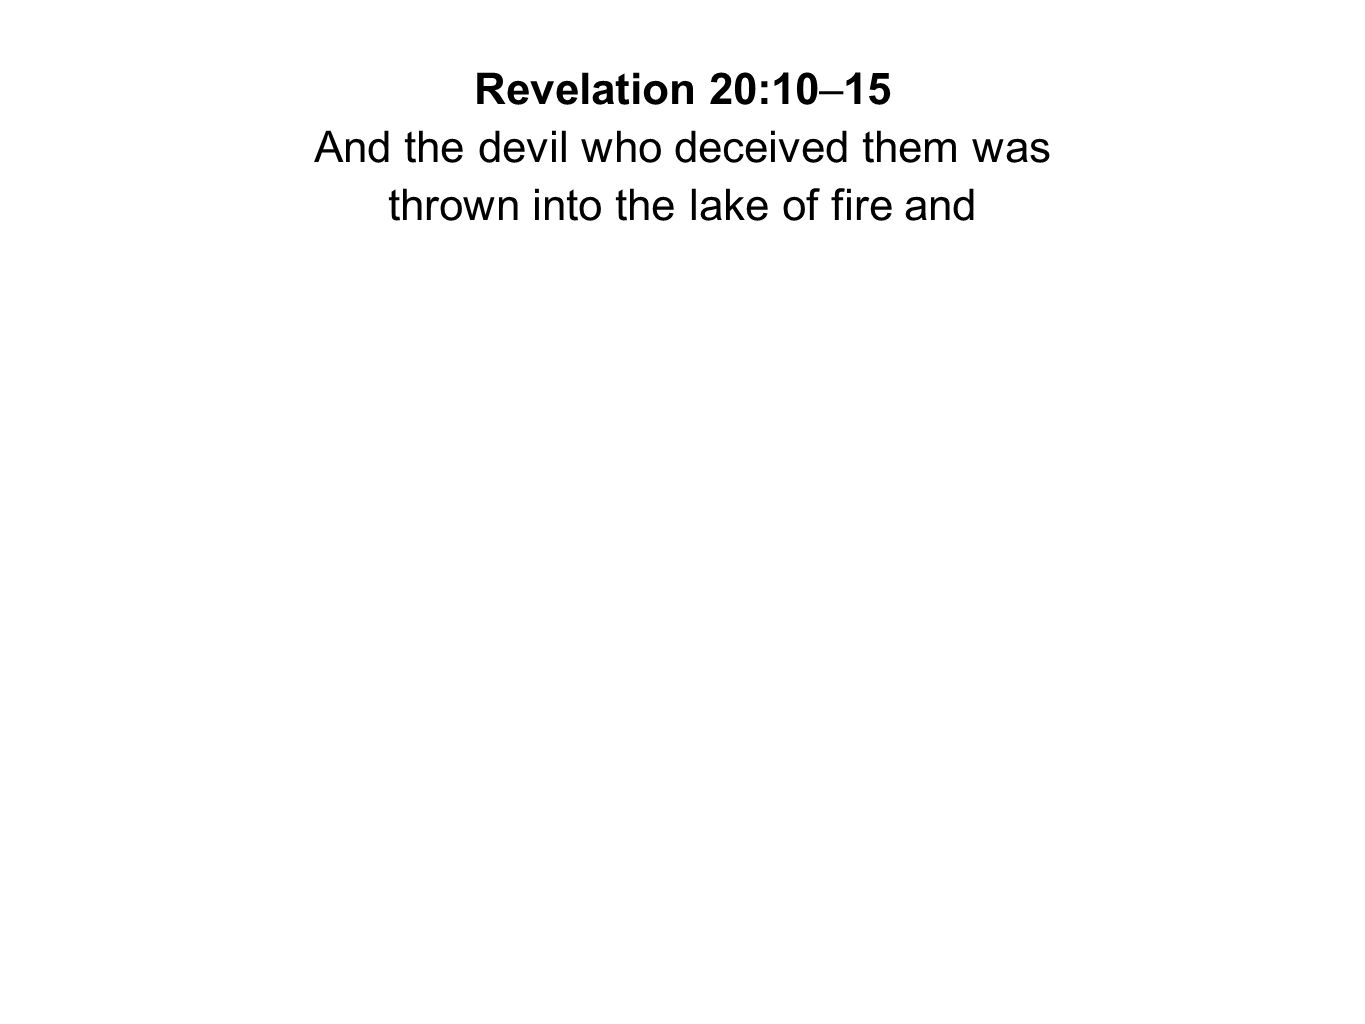 Revelation 20:10–15 And the devil who deceived them was thrown into the lake of fire and